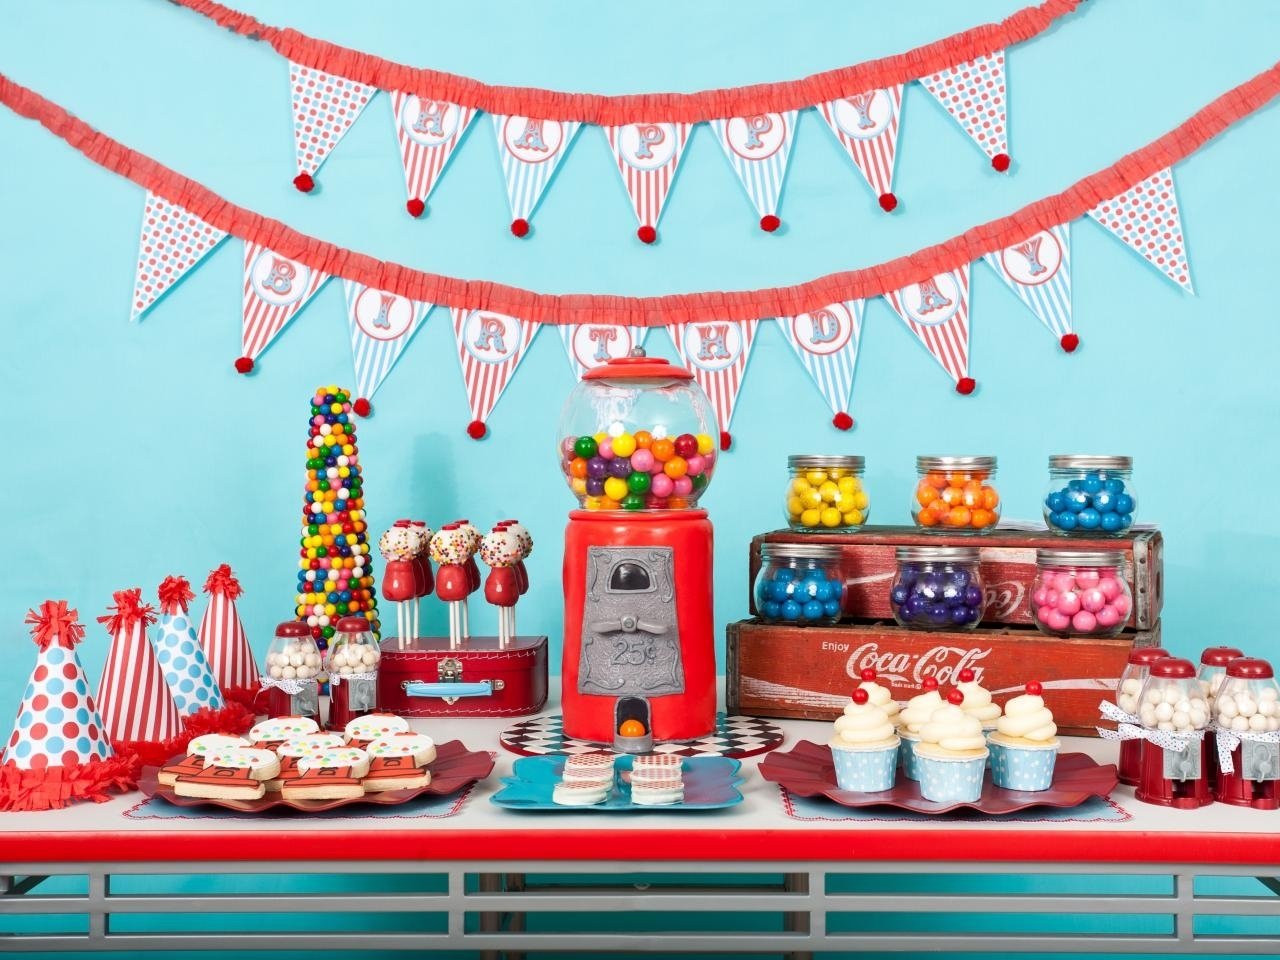 10 Beautiful 12 Year Old Birthday Party Ideas best boy birthday party theme decorations 12 year old birthday party 2 2022